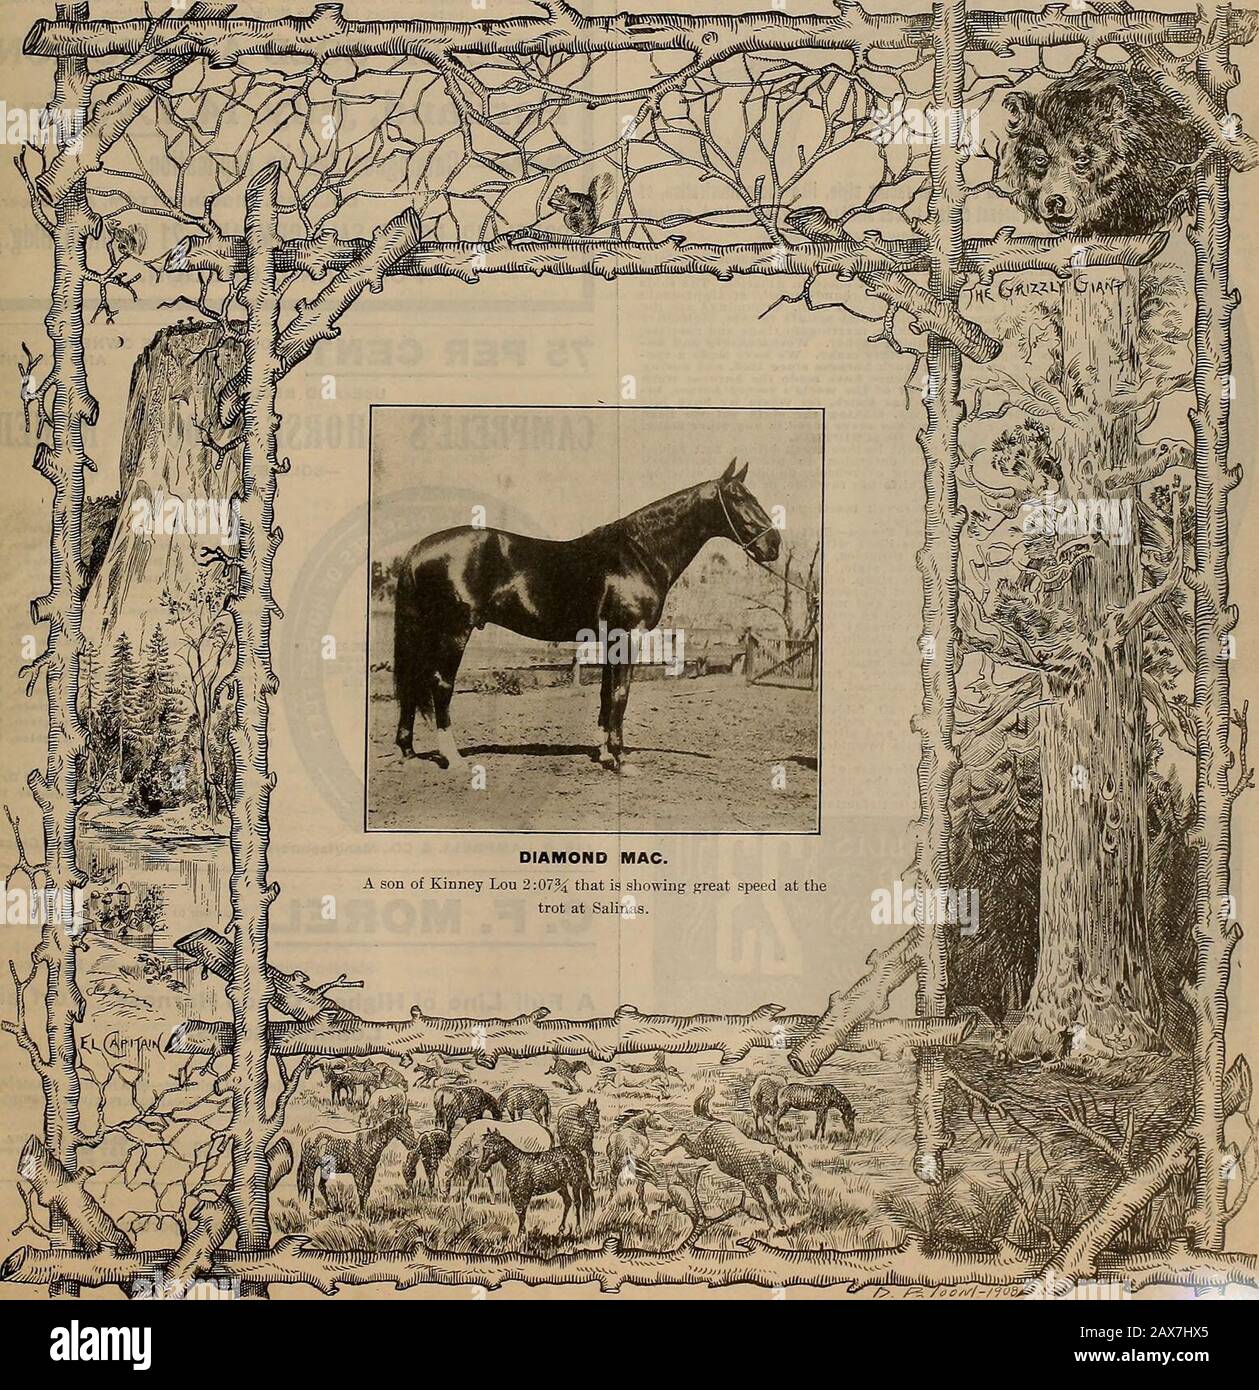 Breeder and sportsman . VOLUME LV. No. 2. SAN FRANCISCO, SATURDAY, JULY 10, 1909. Subscription—$3.00 Per Year.. THE BREEDER AND SPORTSMAN [Saturday, July 10, 1909. Order Direct of Us and Save the Middlemans Profit Jfie CELEBRATED ELLIS I &lt;-***** GJZAJVDCIRCUIT^ COMPLETE SEIMHE THE RECOGNIZED STANDARD TRACKHARNESS OF THE WORLD. ?• - Superior to Any Otner MalCe - ^Mn A Class 3y Itself ^^ FVZLr£QlfAL TO r#ACJC HARNESS SOLD Br OrffER MANOFACri/&ERS ATST/)ros/?Z f&Z&rtf/rEEO W EVERY RESPECT. YOJP N02/EYFEFCY/SBED ,Jf/ fi.M AW r/S MIL PAYEXPRESS CHARGES BOTHfiX/J/FIIQTSWSFiaF v ****• Stock Photo